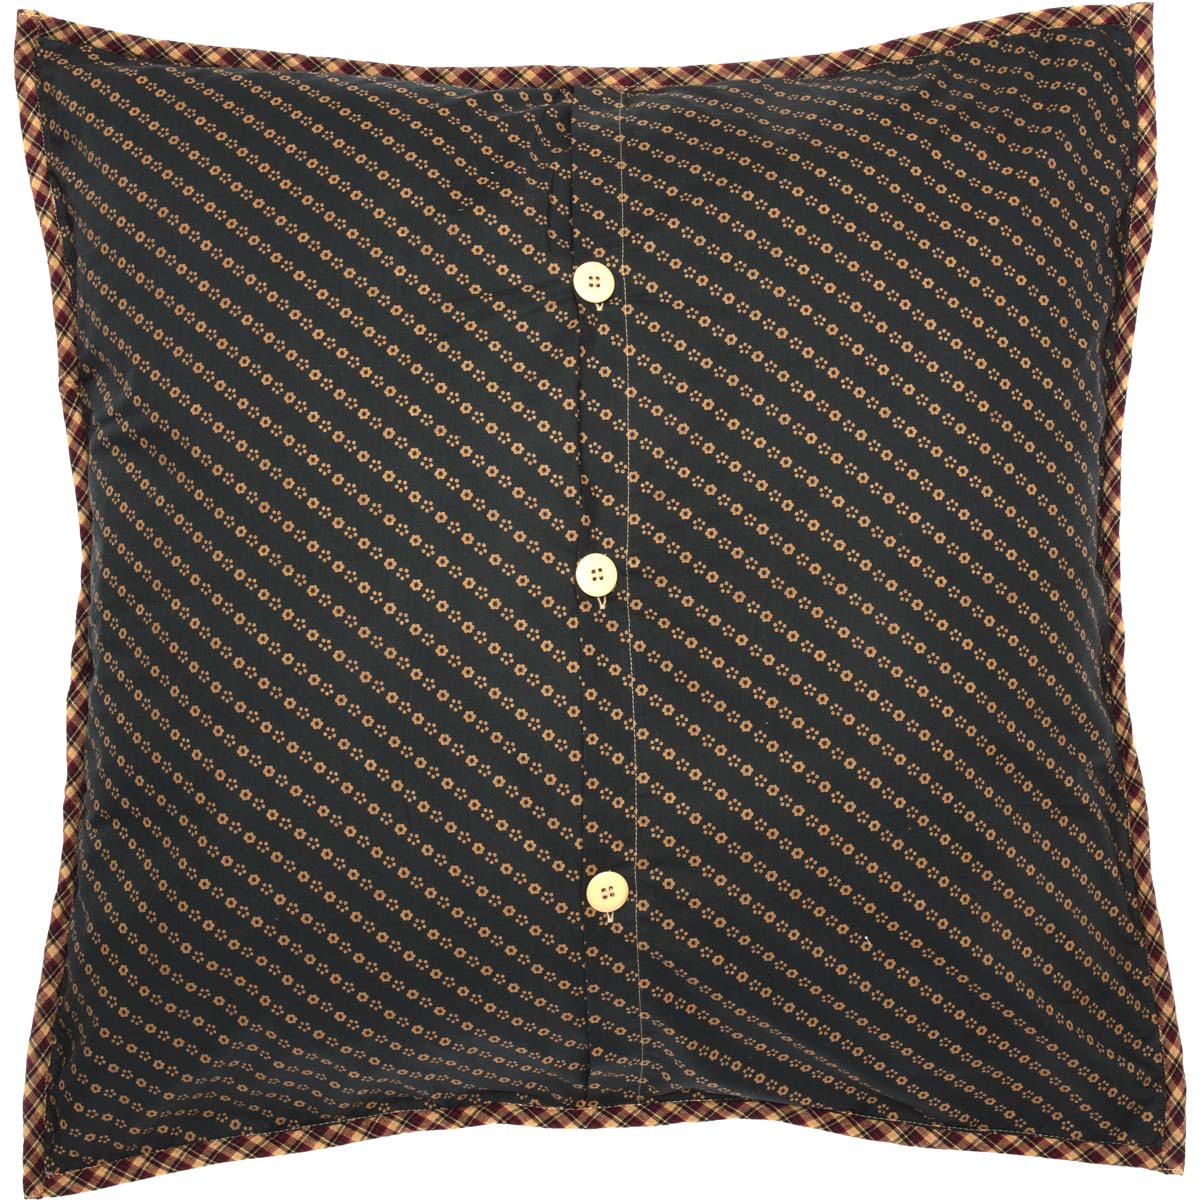 Patriotic Patch Euro Sham Quilted 26x26 VHC Brands